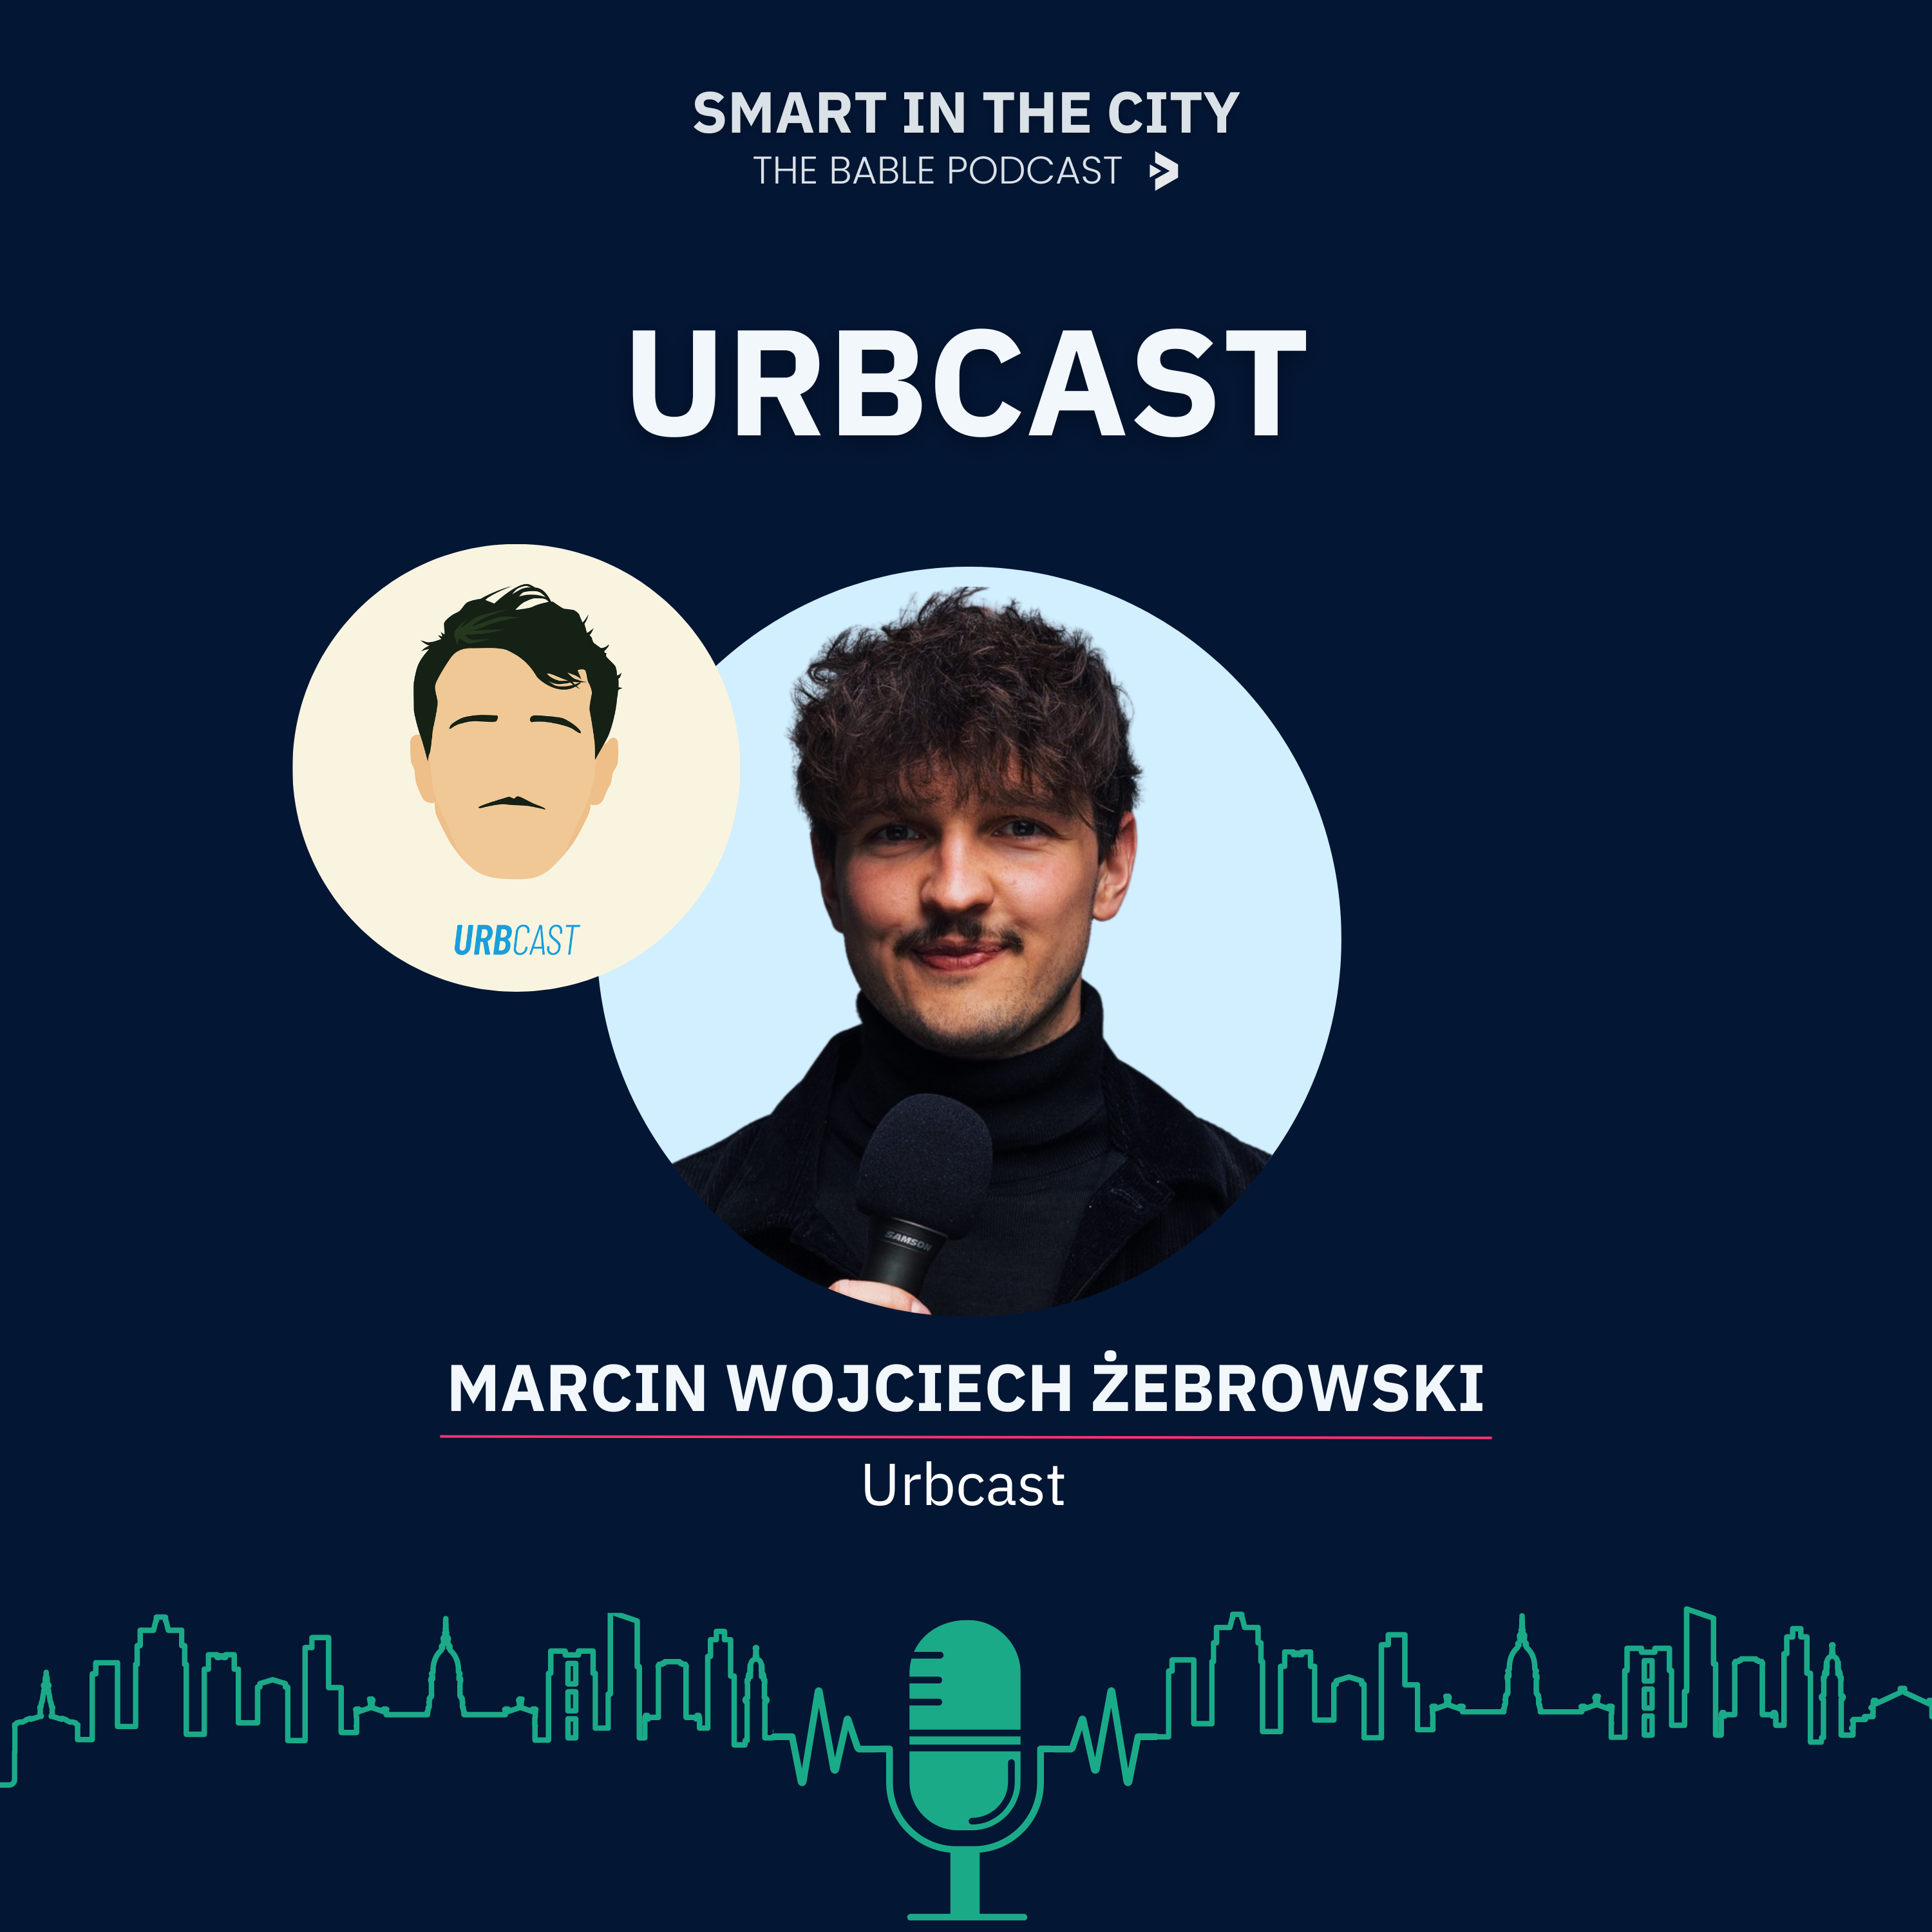 #27 Urbcast: Urbanism as "A Lens Through Which We Look At The City"